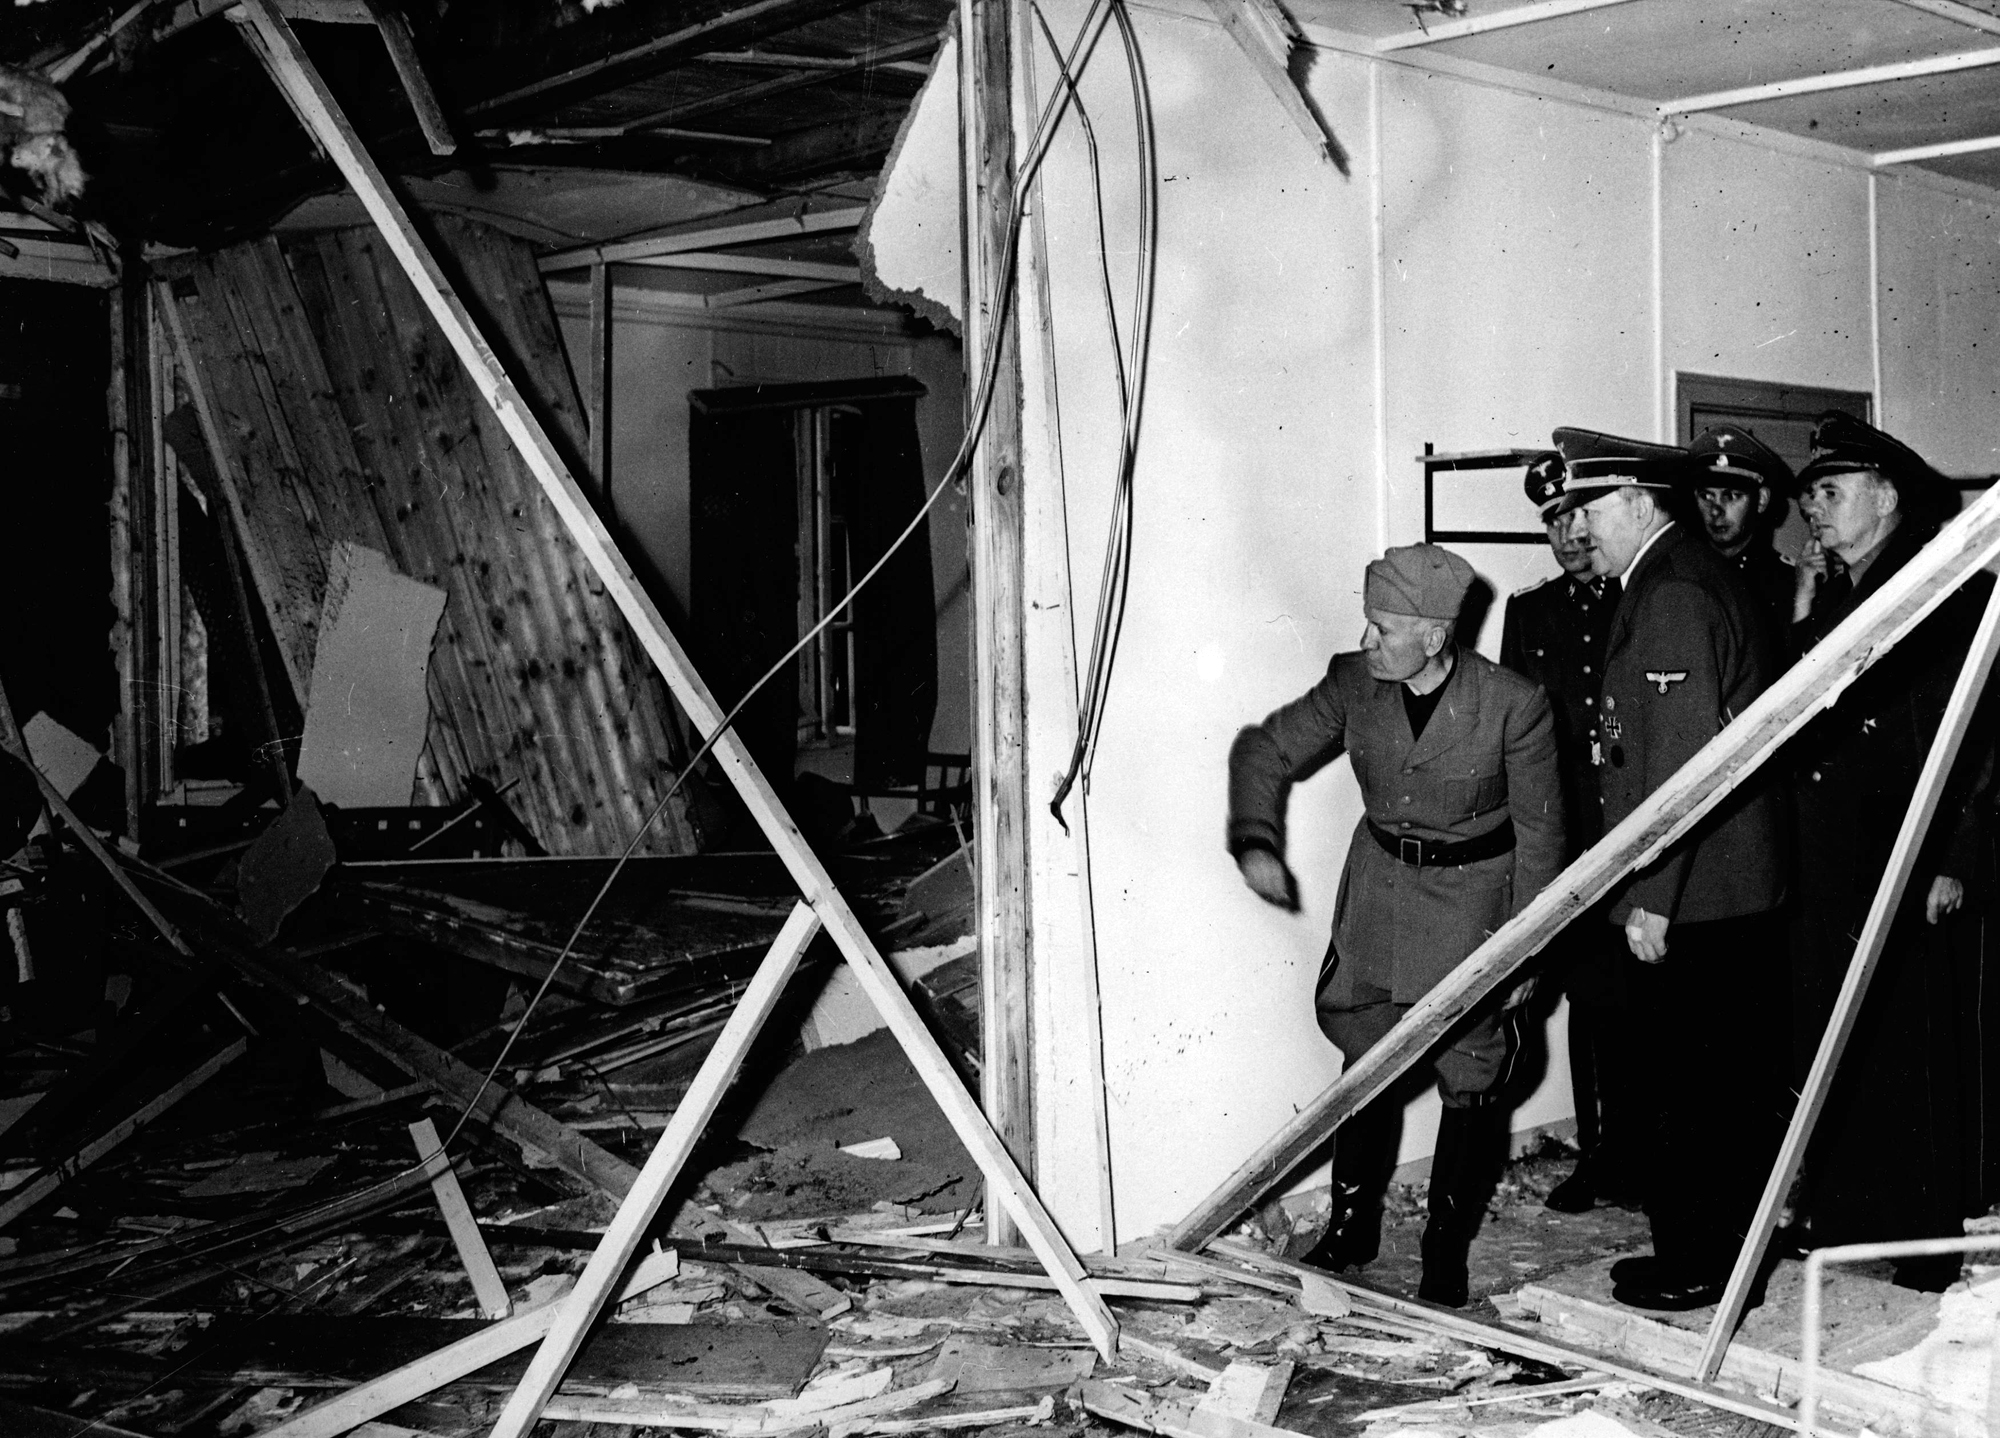 Mussolini and Hitler inspect the wreckage of the conference room